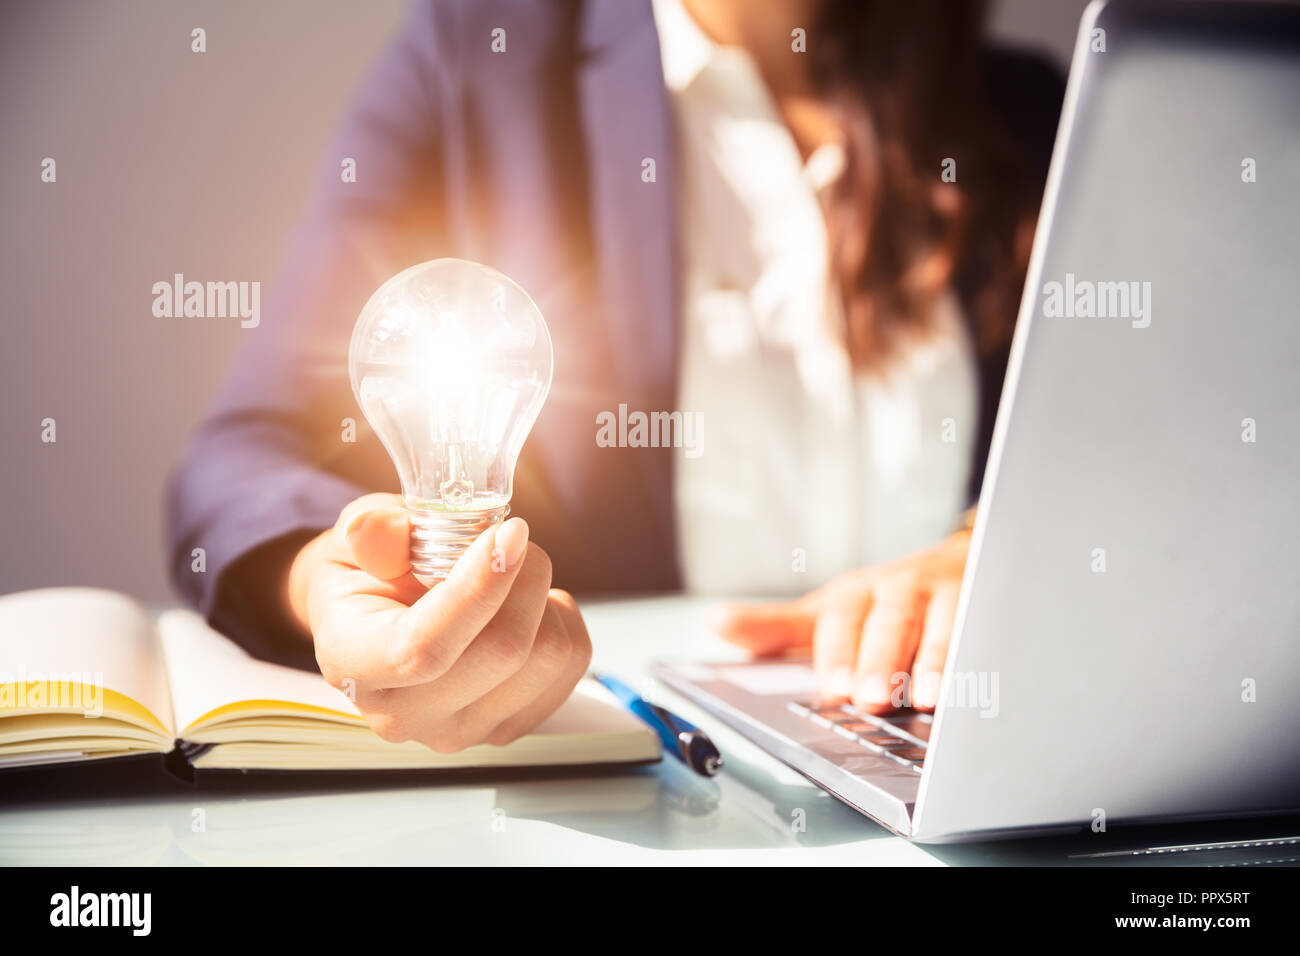 Close-up Of A Businesswoman's Hand Holding Illuminated Light Bulb In Office Stock Photo